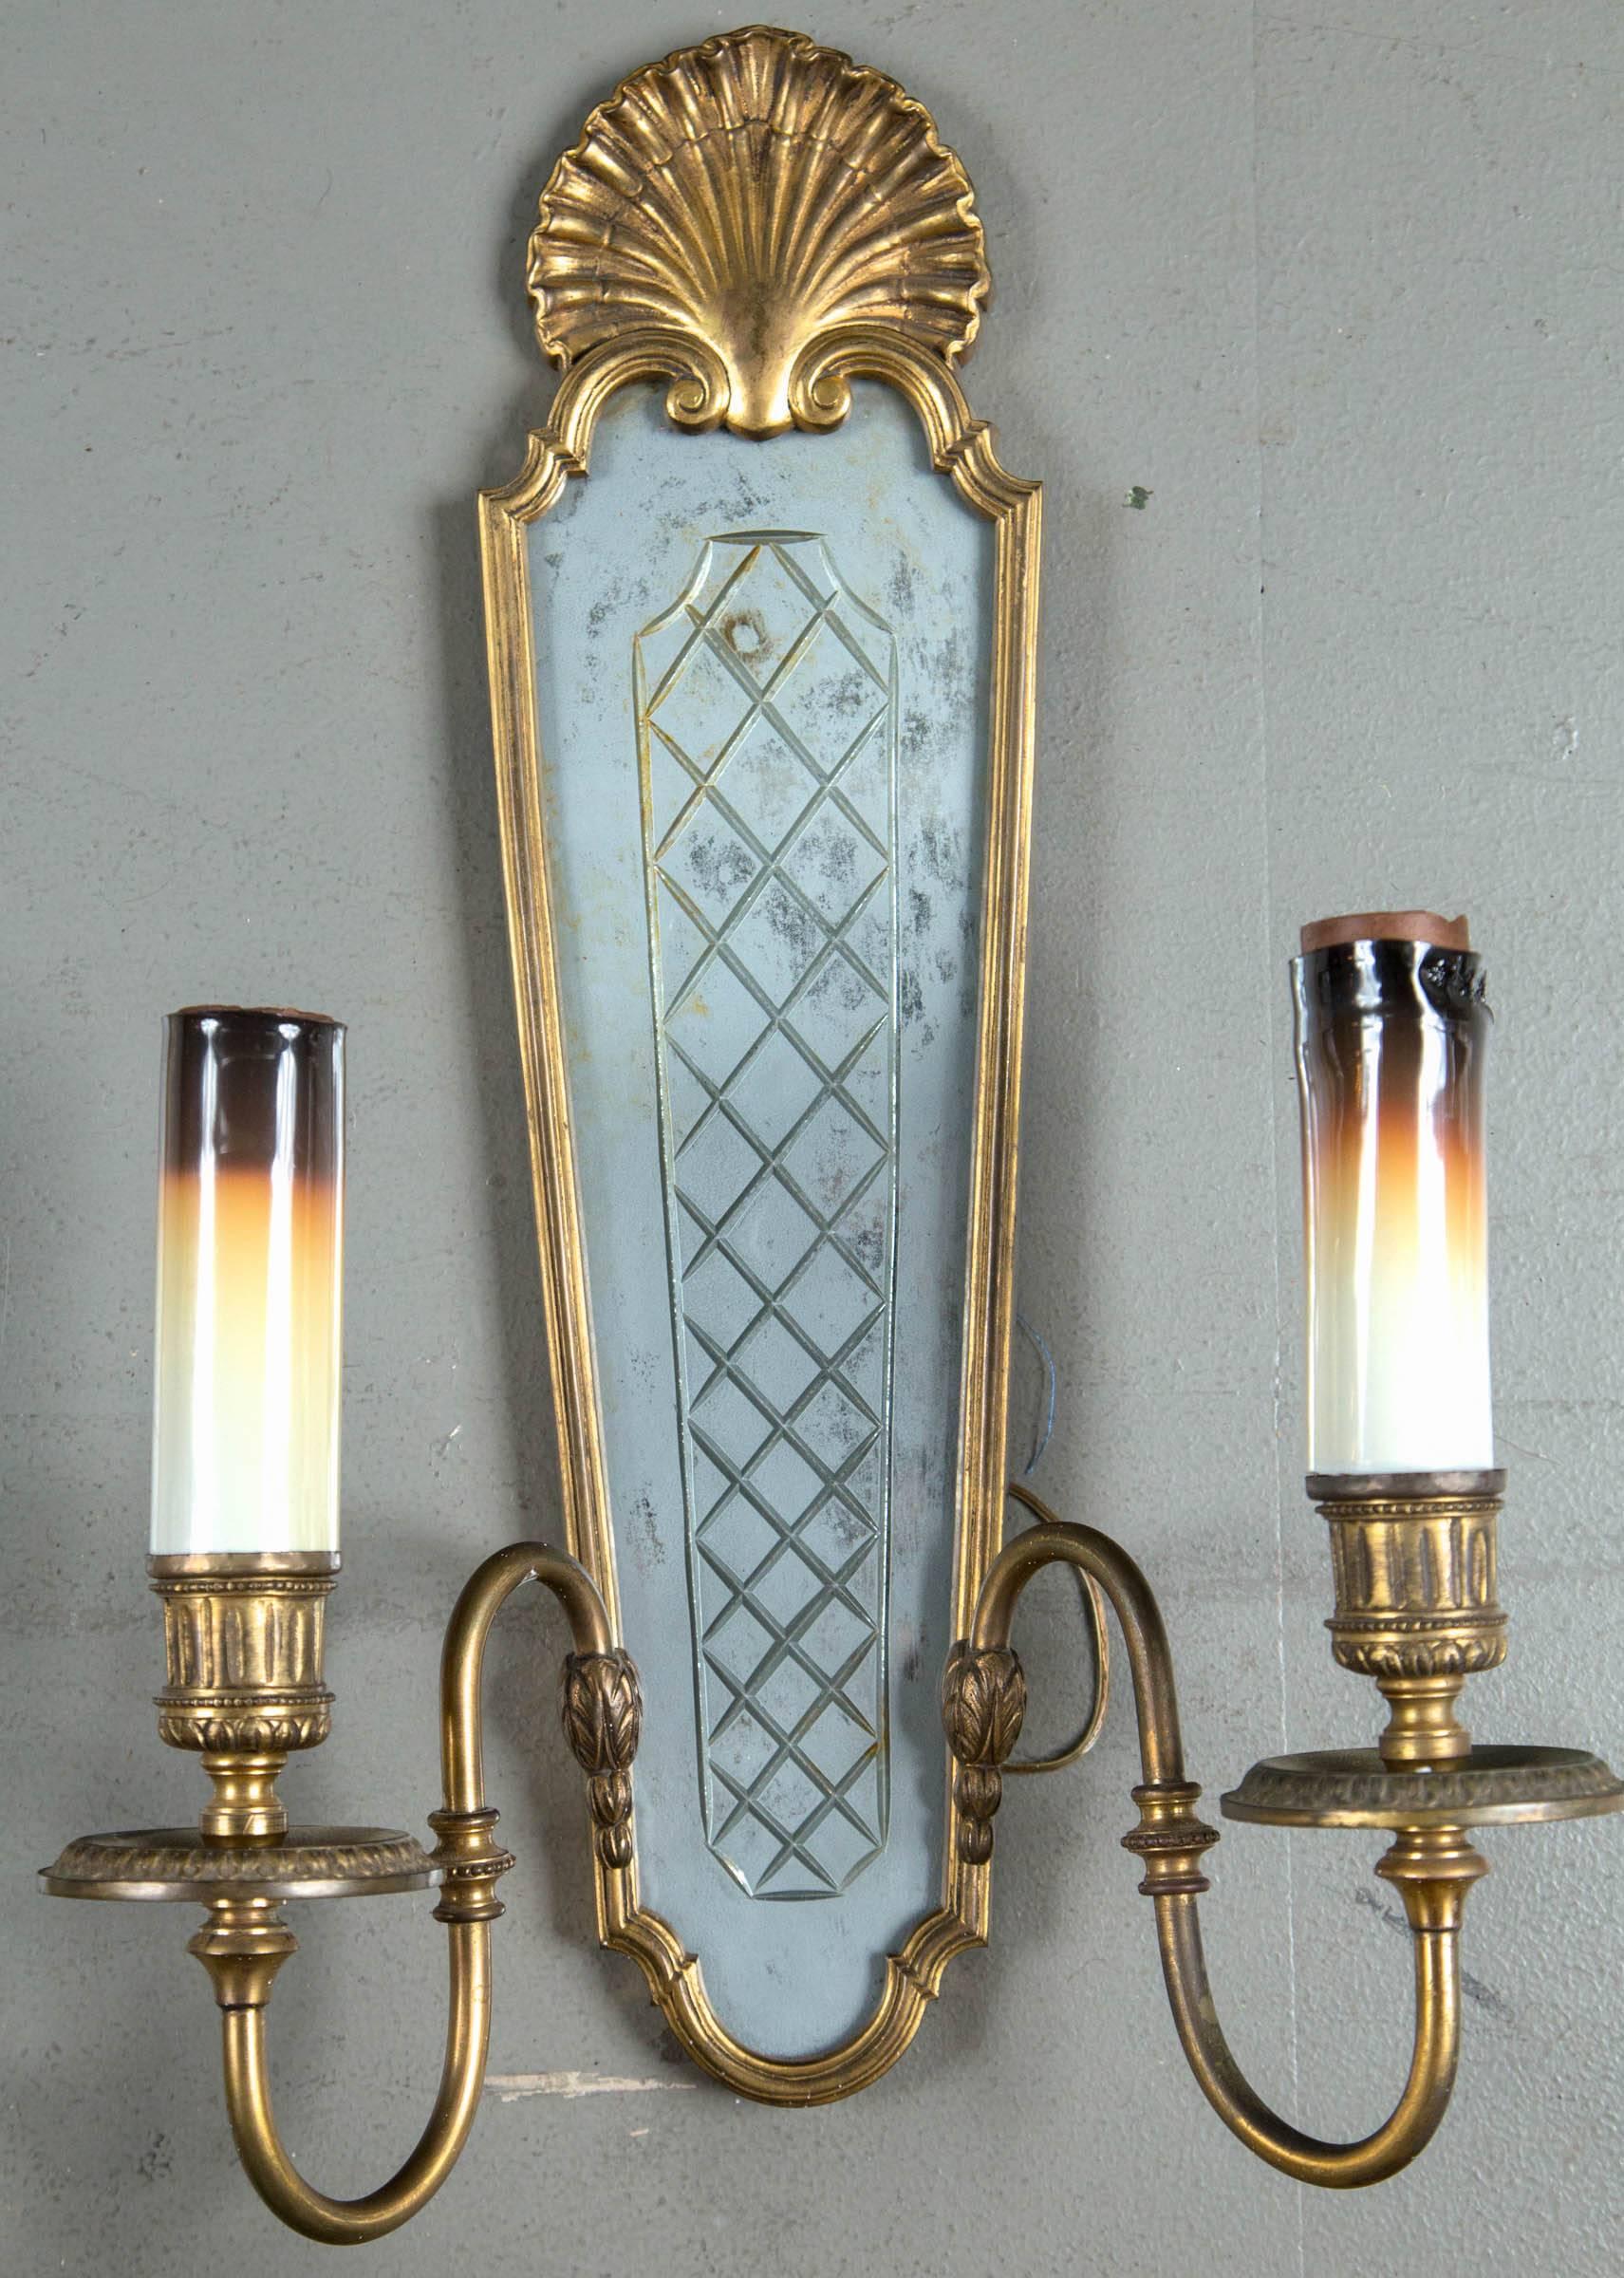 Caldwell two-light sconces with etched mirror backplate, circa 1920s. Set of six available priced per pair.